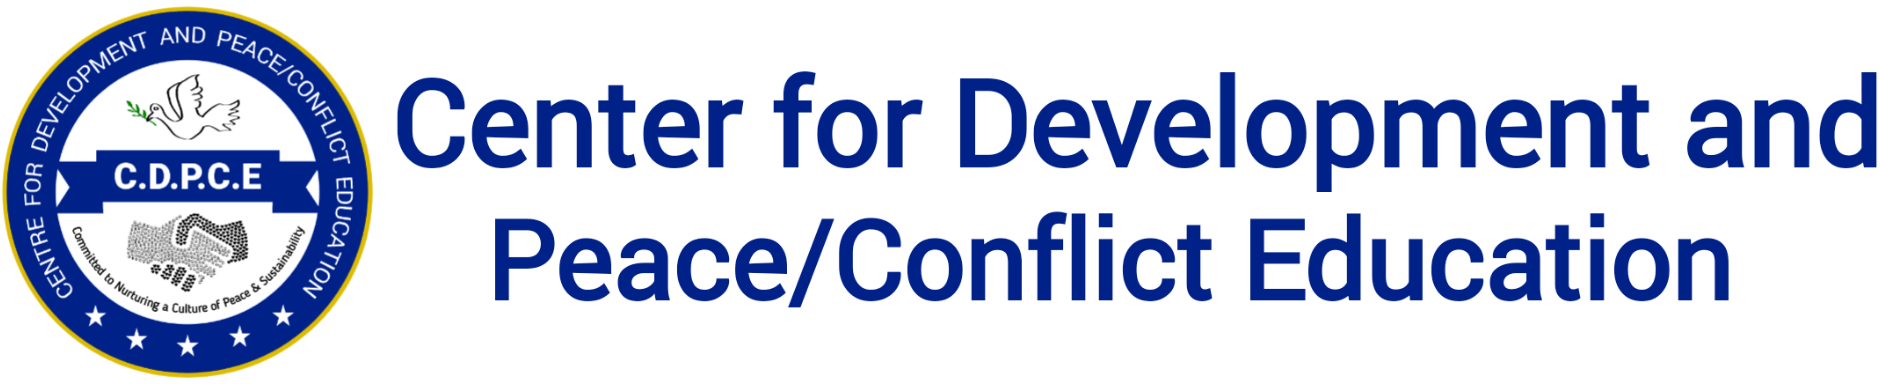 Center for Development and Peace/Conflict Education